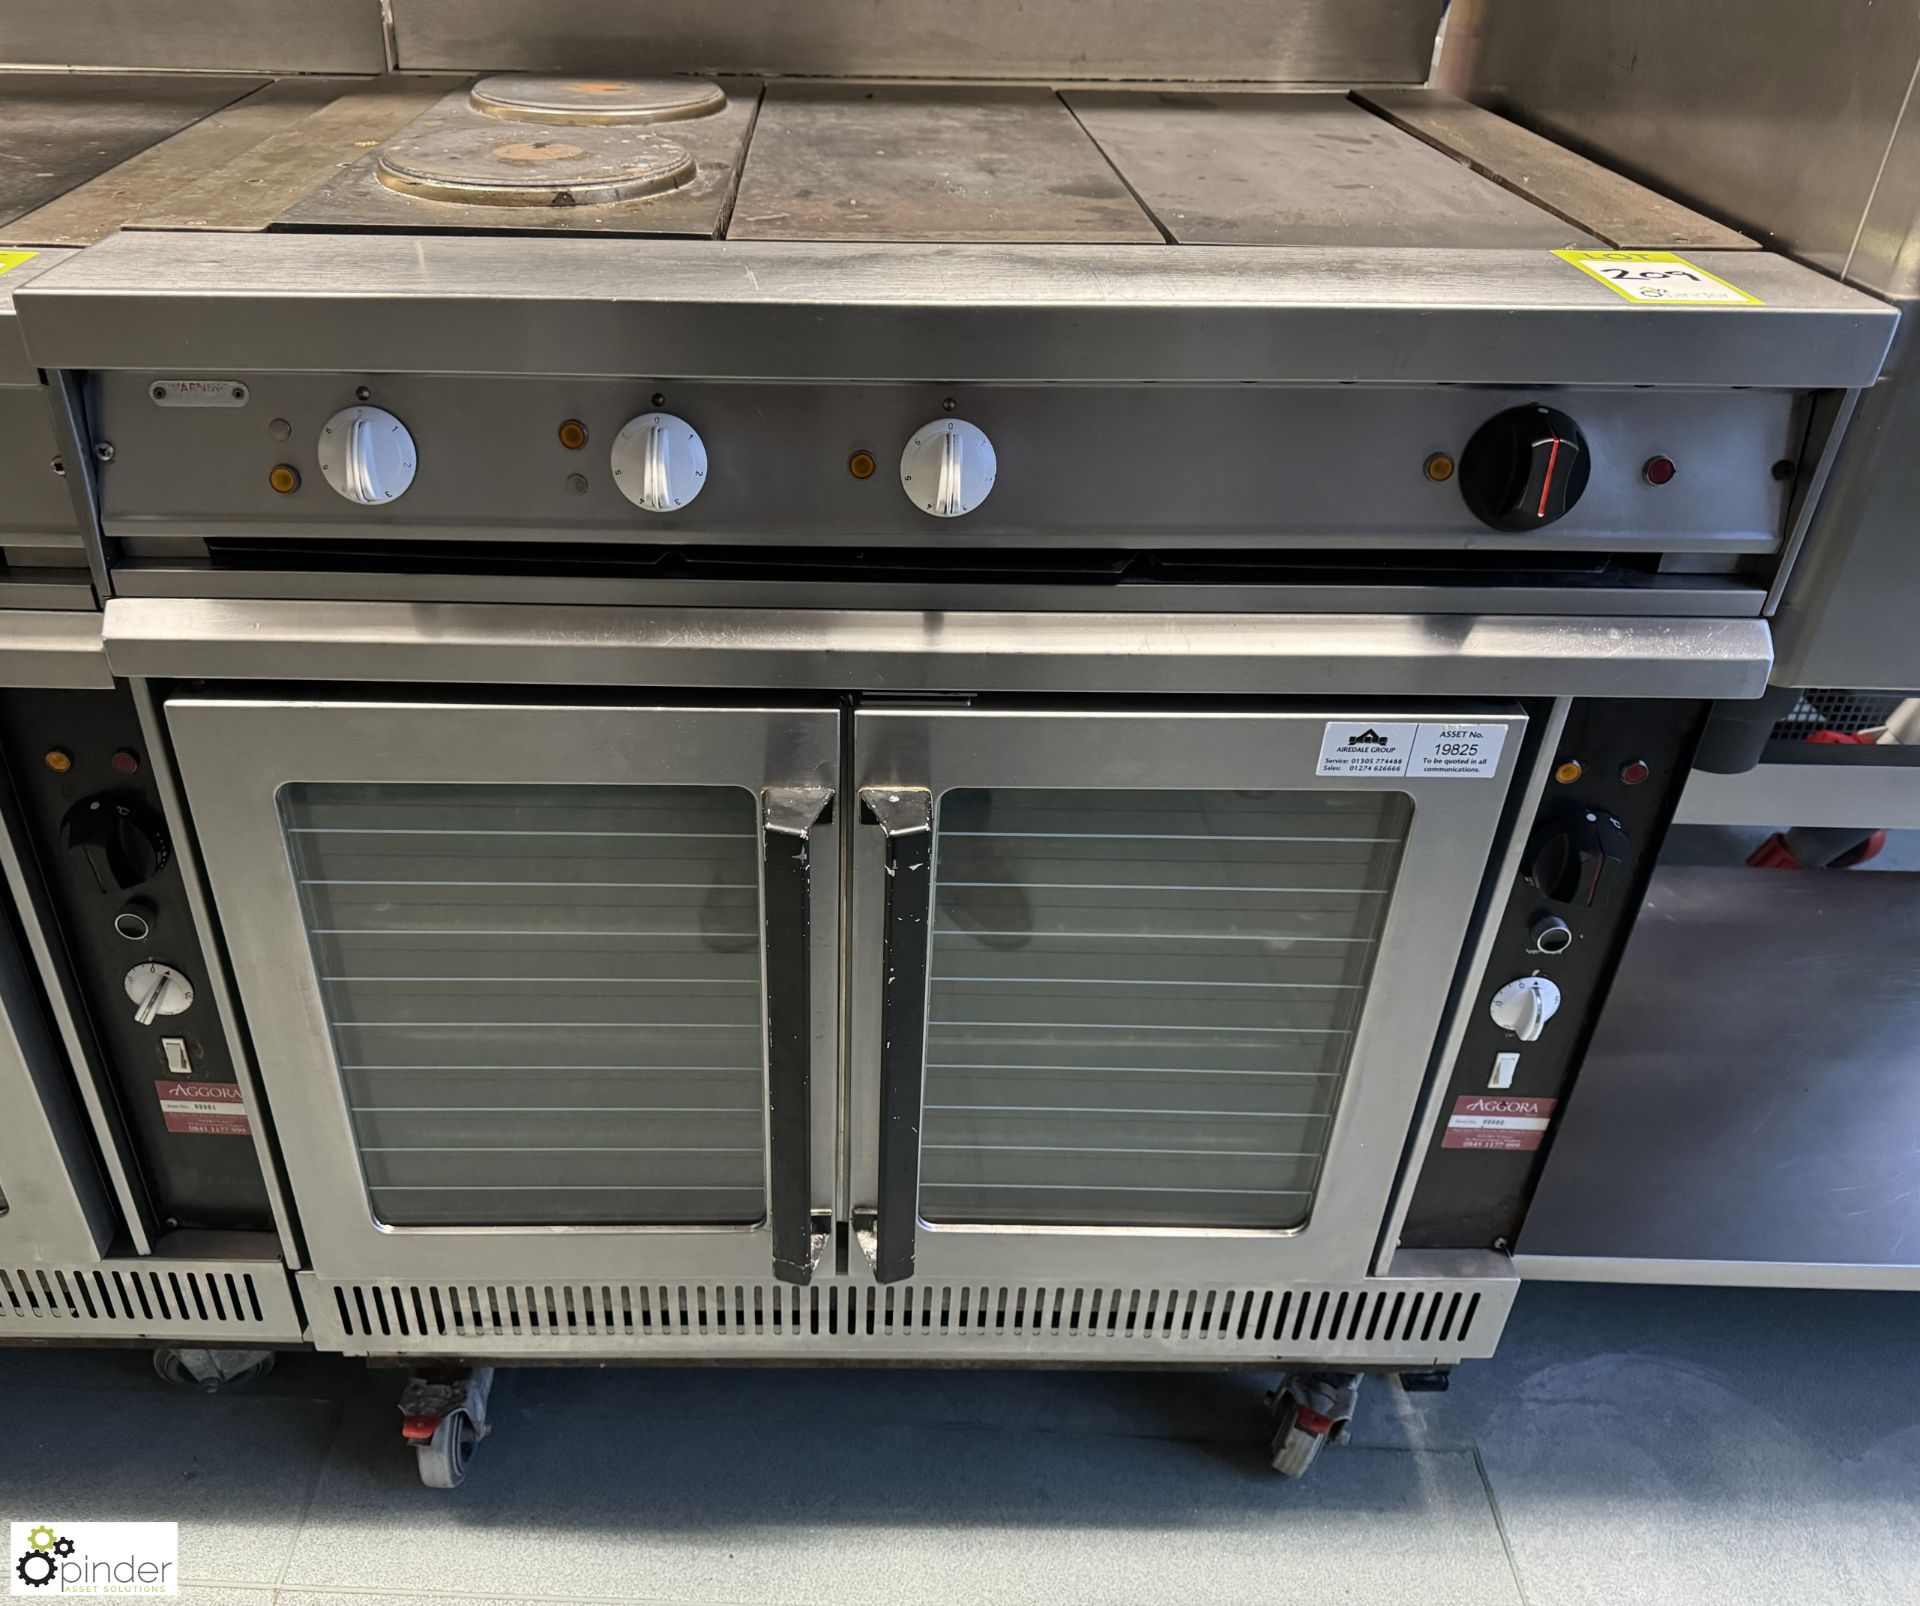 Stainless steel mobile electric double door Oven, 415volts, 900mm x 750mm x 1000mm, with 2 hobs - Image 2 of 5